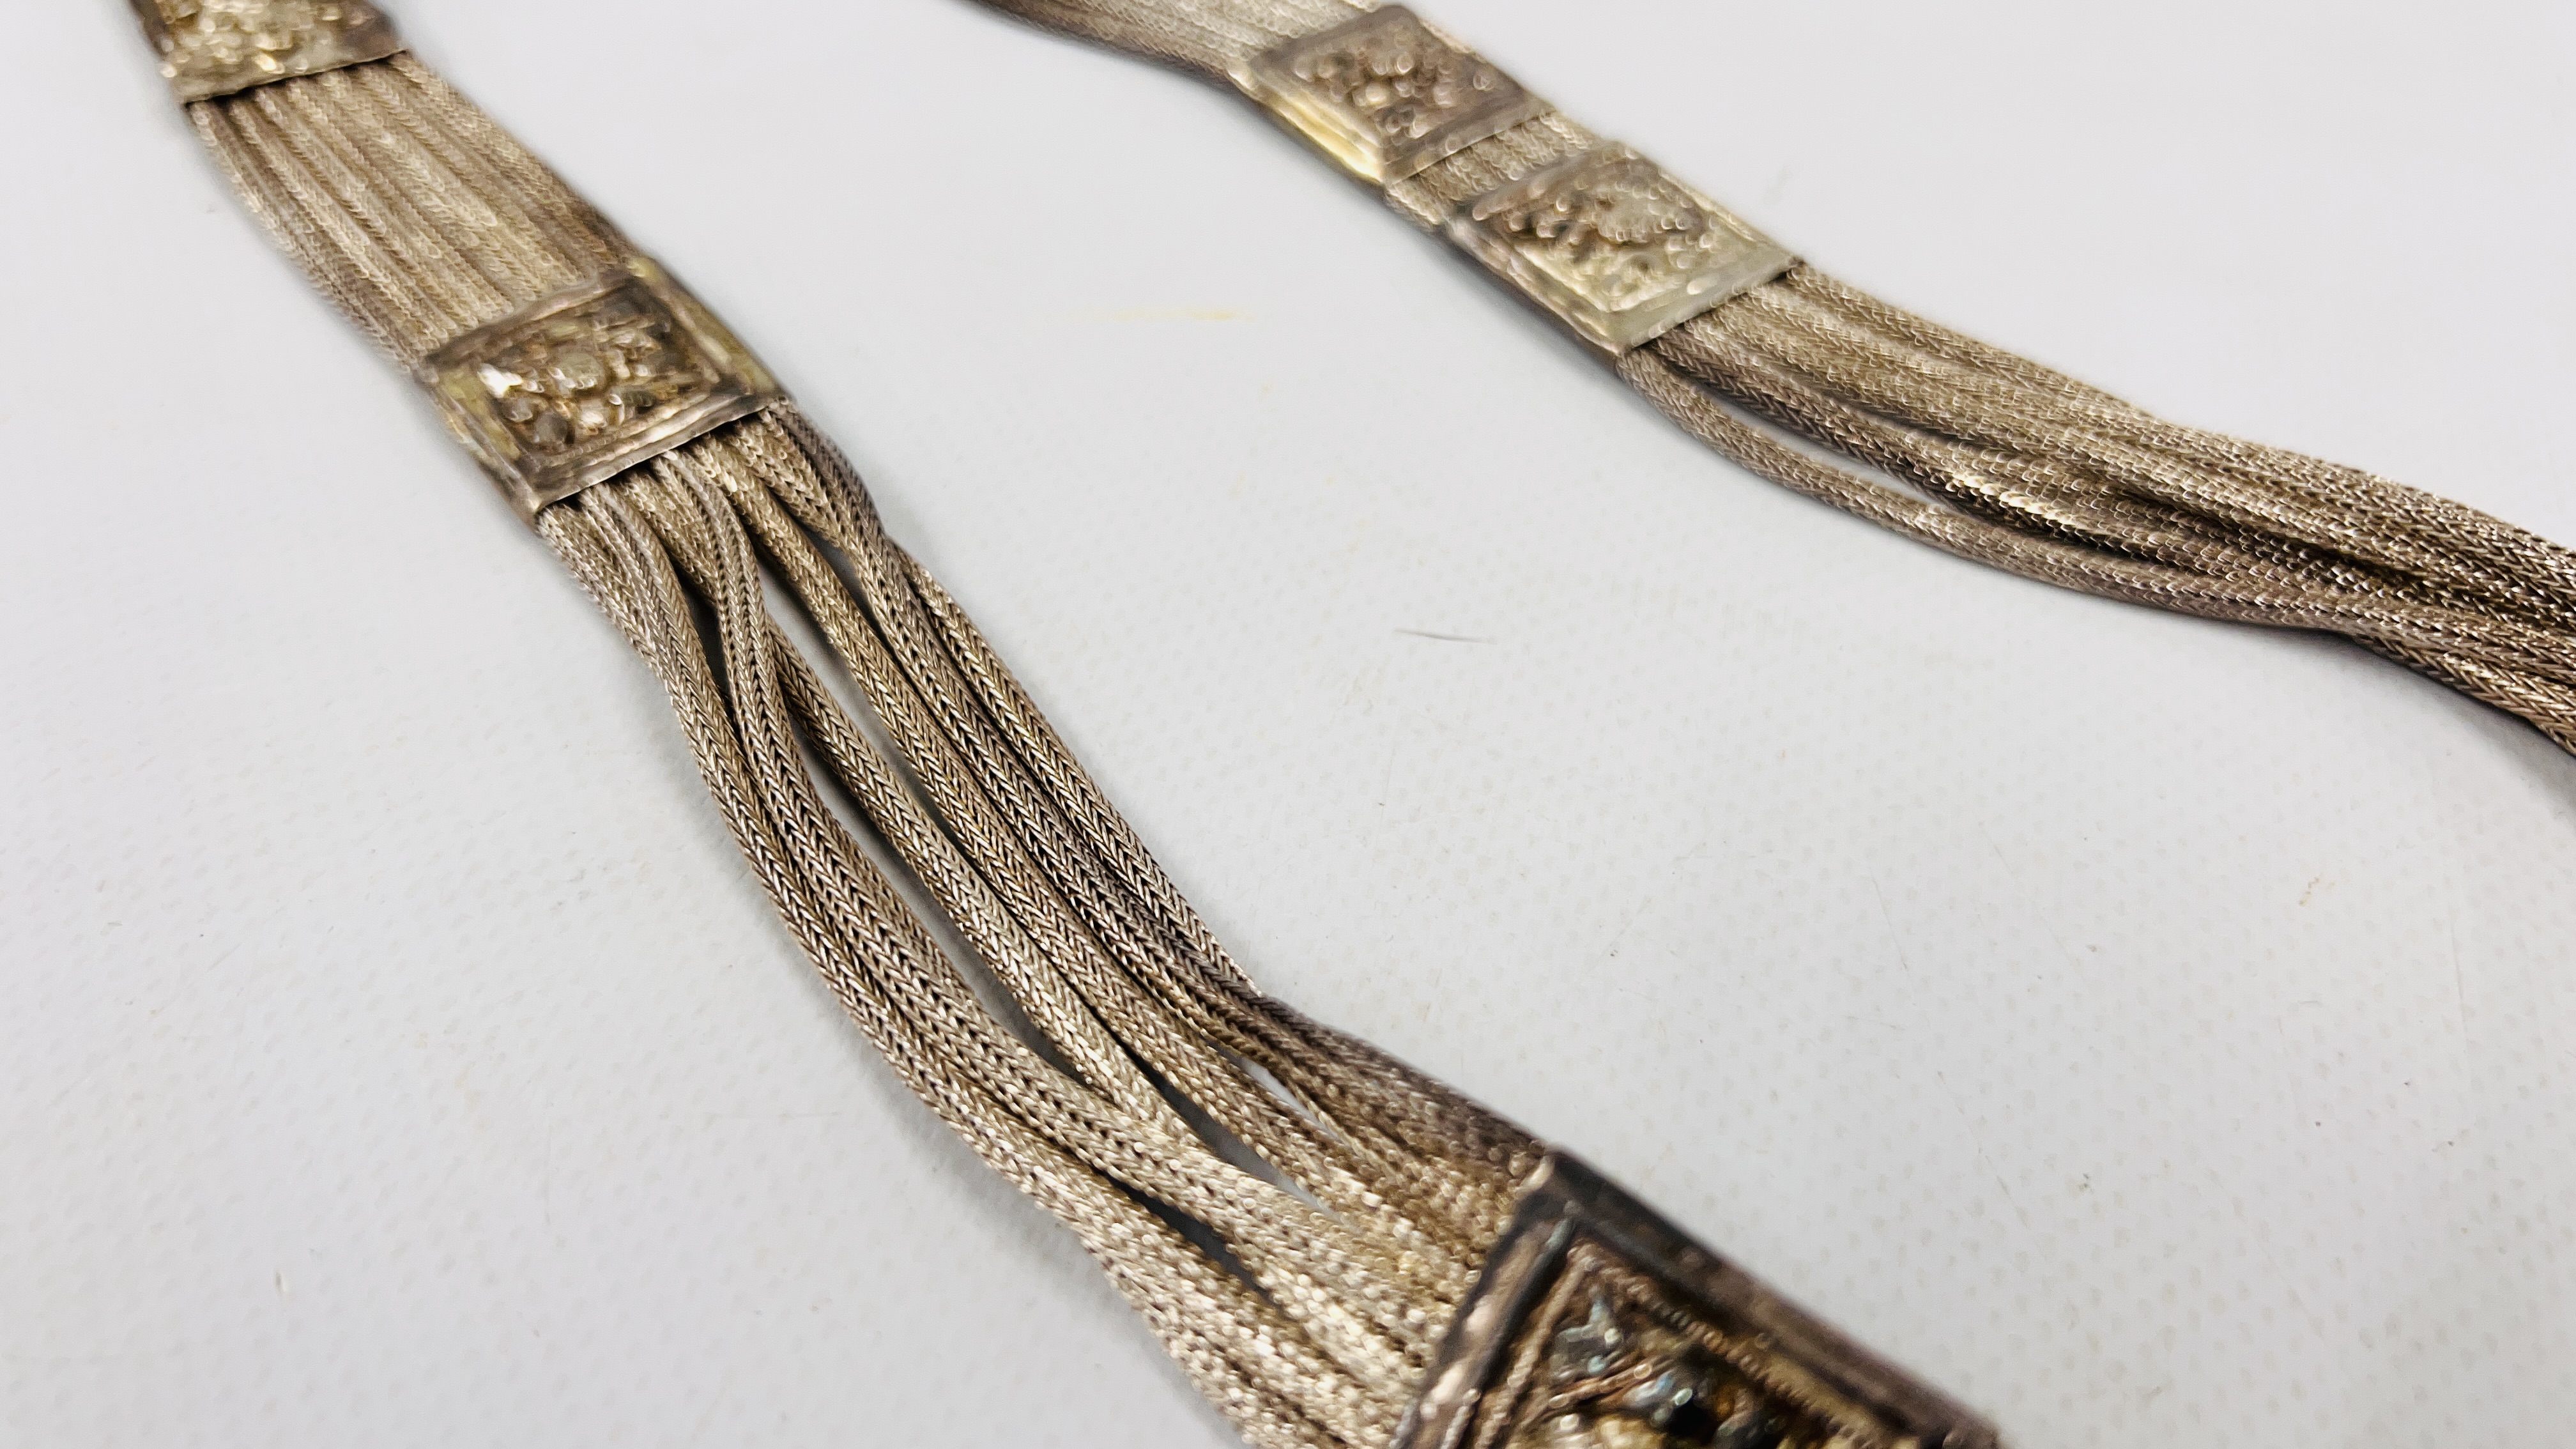 AN ELABORATE EASTERN WHITE METAL BELT OF WOVEN DESIGN THE CLASP MARKED WITH EASTERN SYMBOLS, L 60CM. - Image 3 of 8